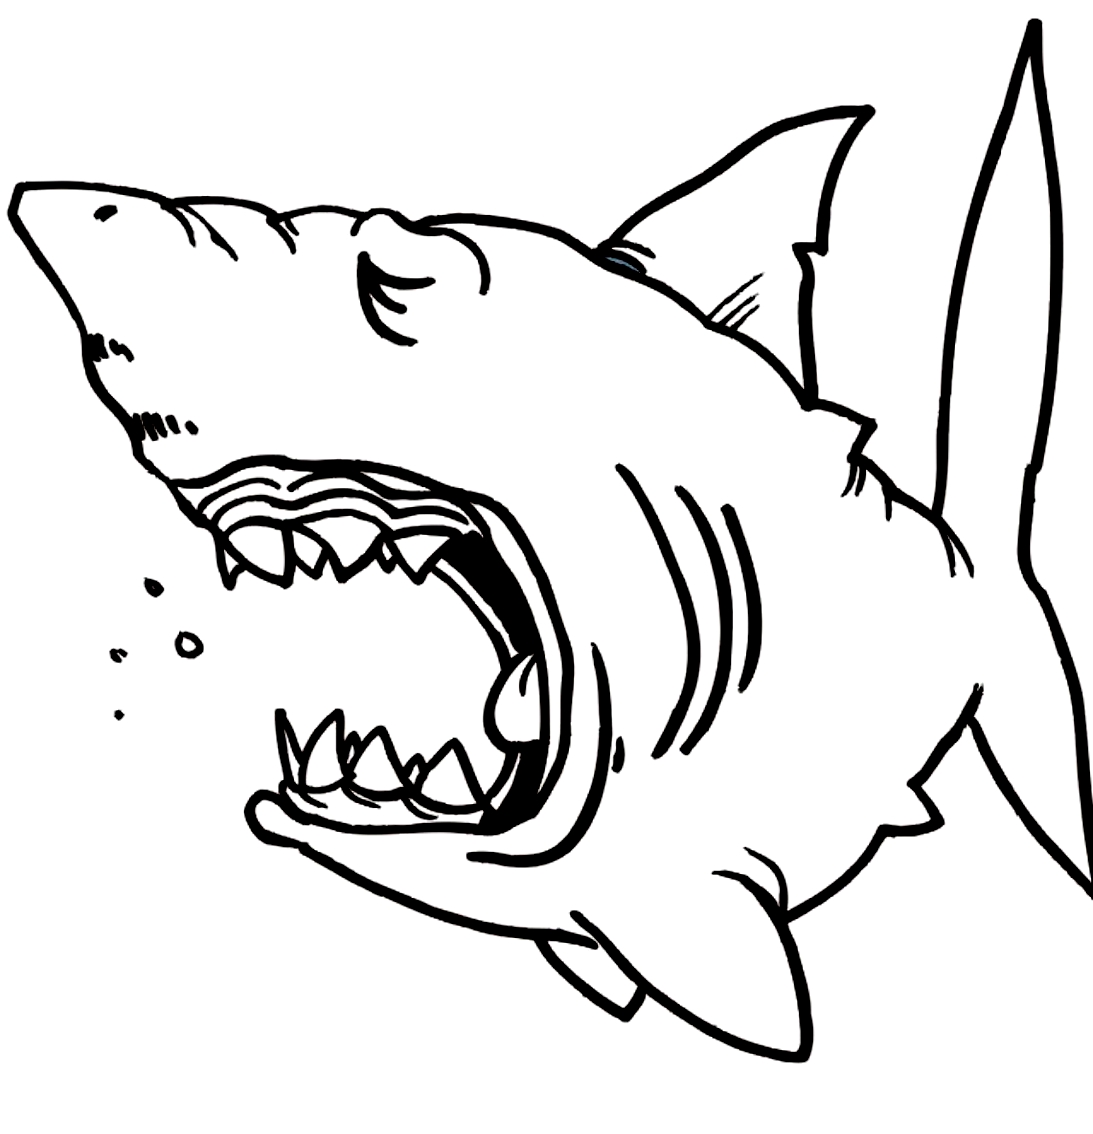 Drawing 10 from Sharks coloring page to print and coloring